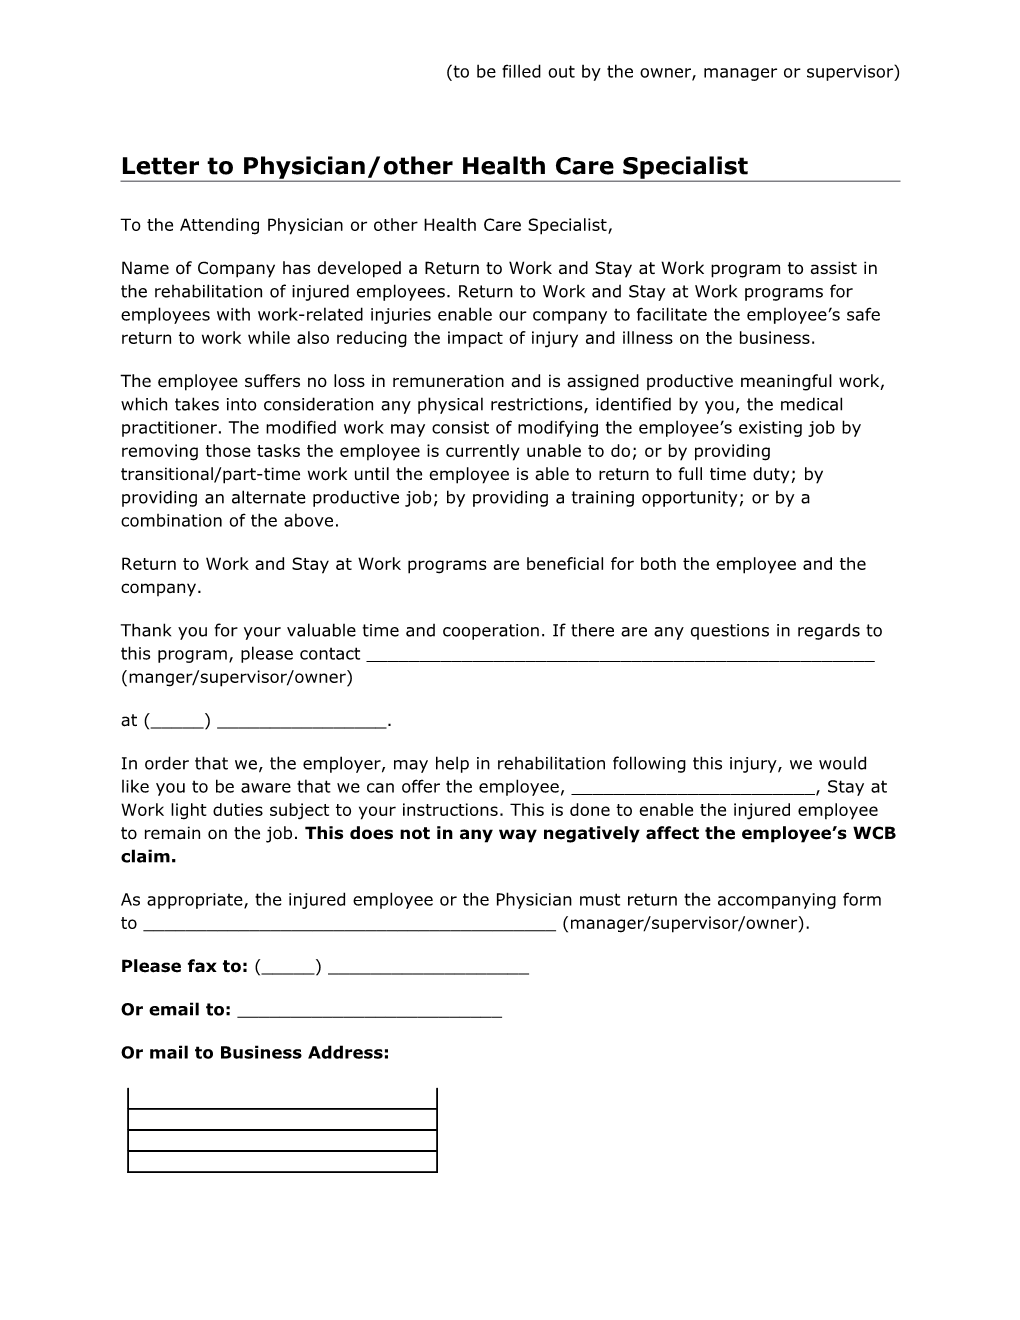 Letter to Physician/Other Health Care Specialist